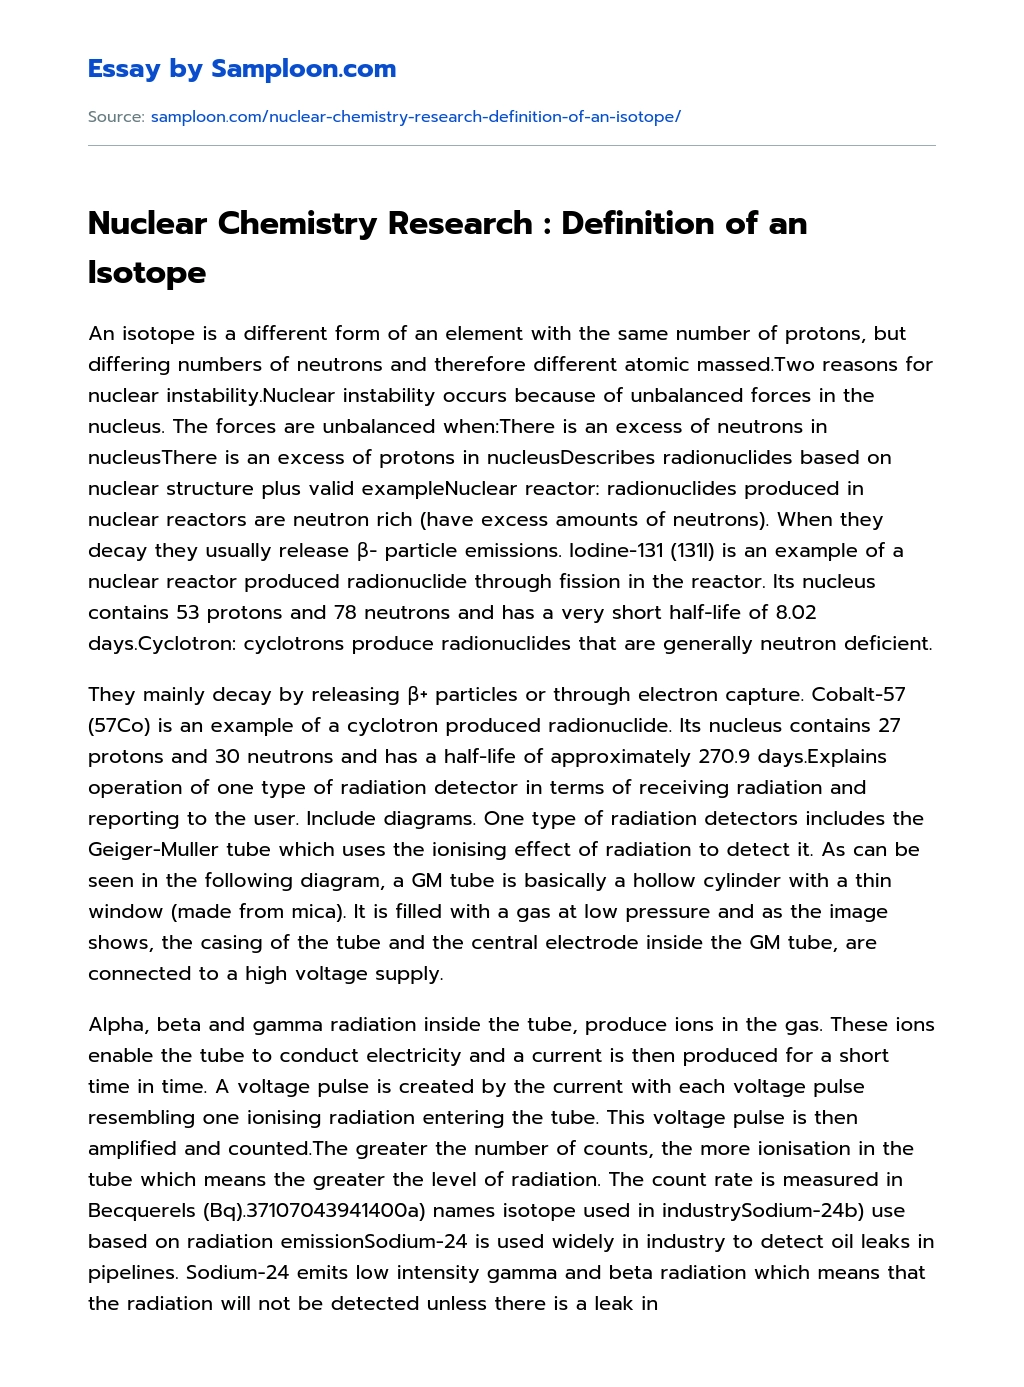 Nuclear Chemistry Research : Definition of an Isotope essay